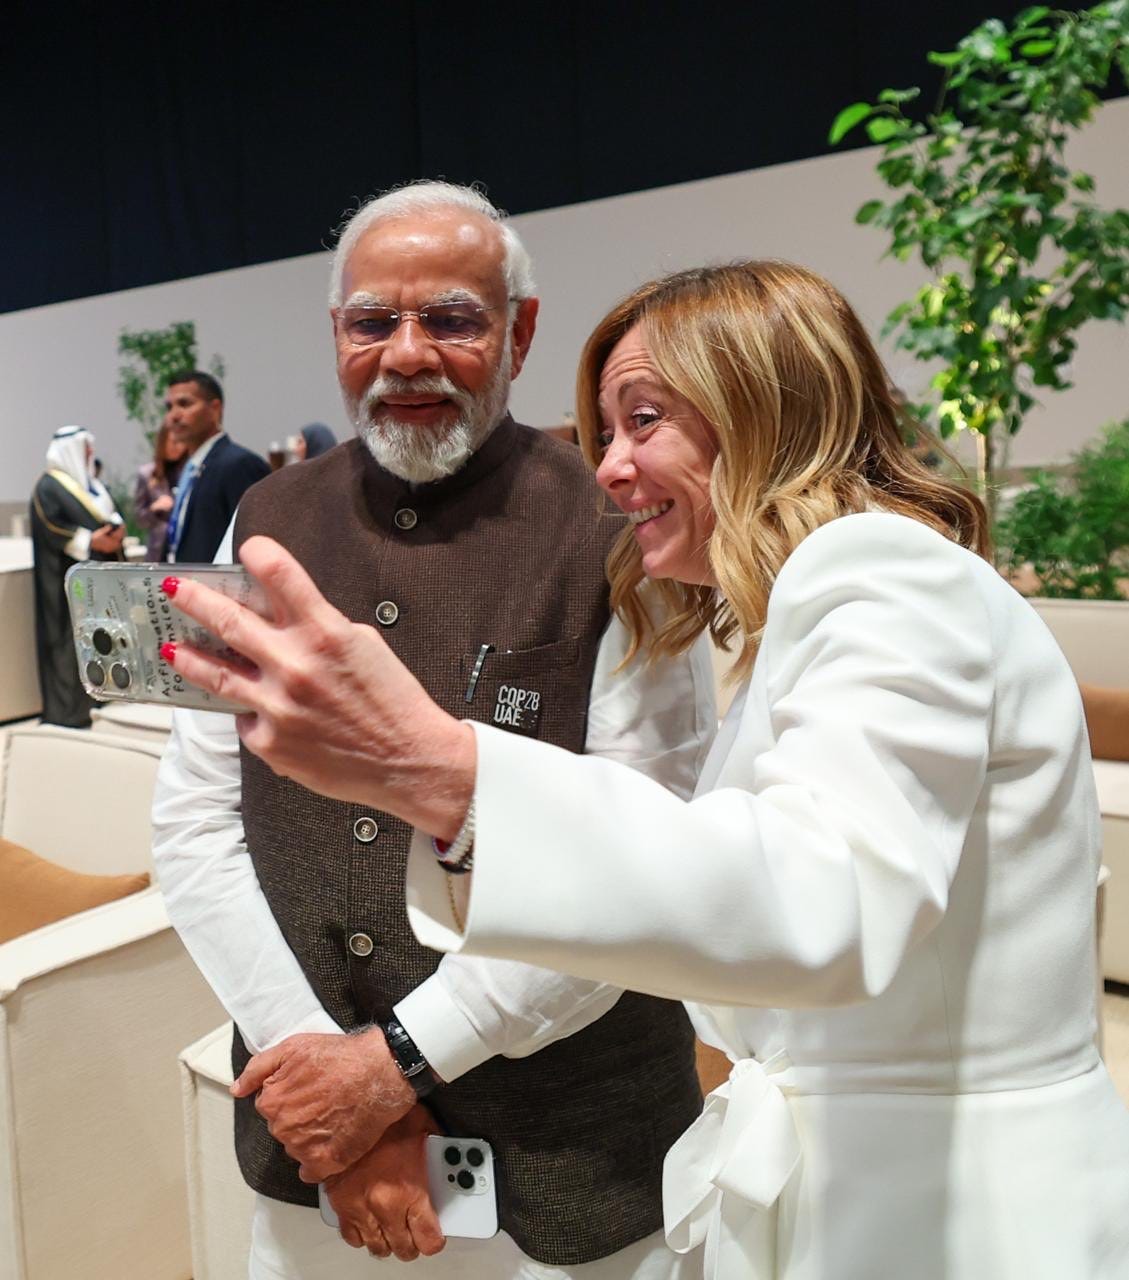 After #Melodi Selfie with PM Modi, Netizens shift focus on Giorgia Meloni's  phone cover